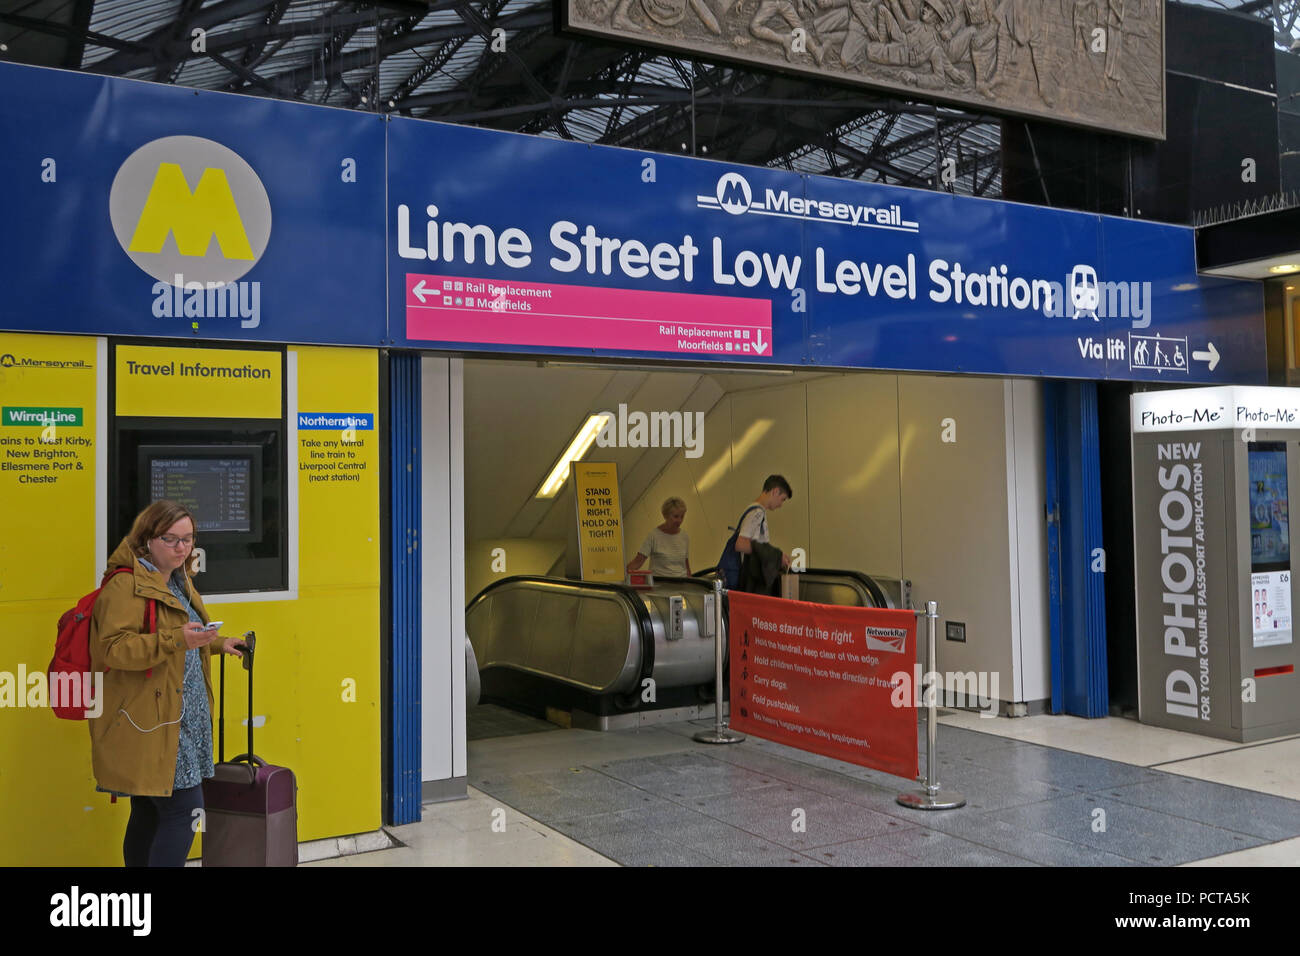 Lime Street Low Level Railway Station Entrance, Liverpool, Lime Street, Merseyside, North West England, UK Stock Photo